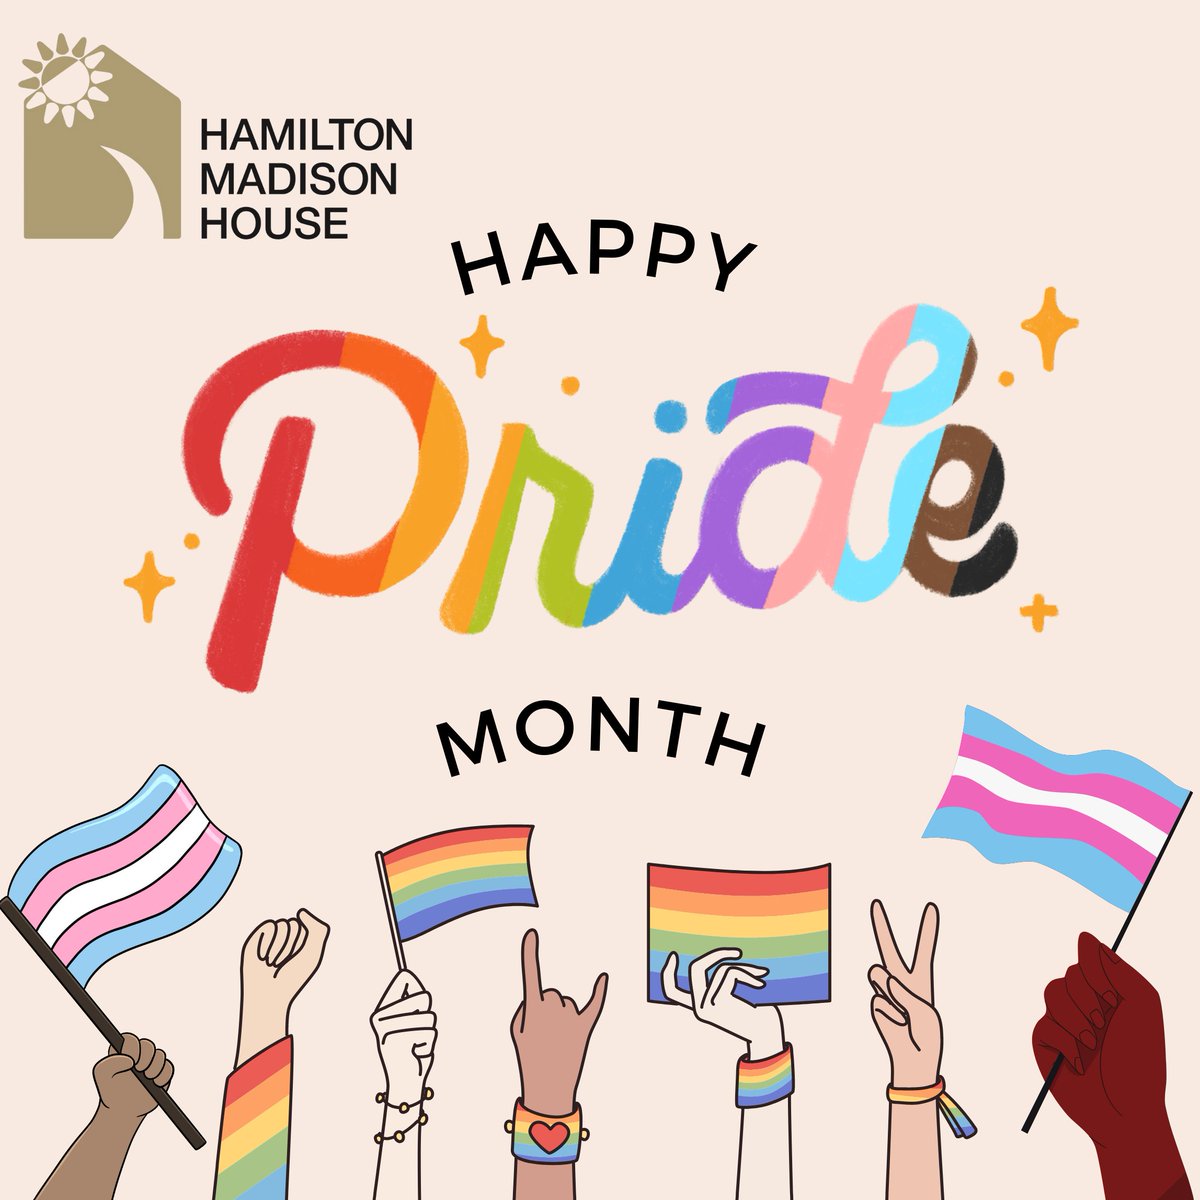 Happy Pride Month, everyone! We are thrilled to celebrate with our amazing community members and staff who identify as LGBTQ+. You are all welcome and valued here, and we support your right to love and be yourself. Let's make every month a time of inclusion, solidarity and pride!